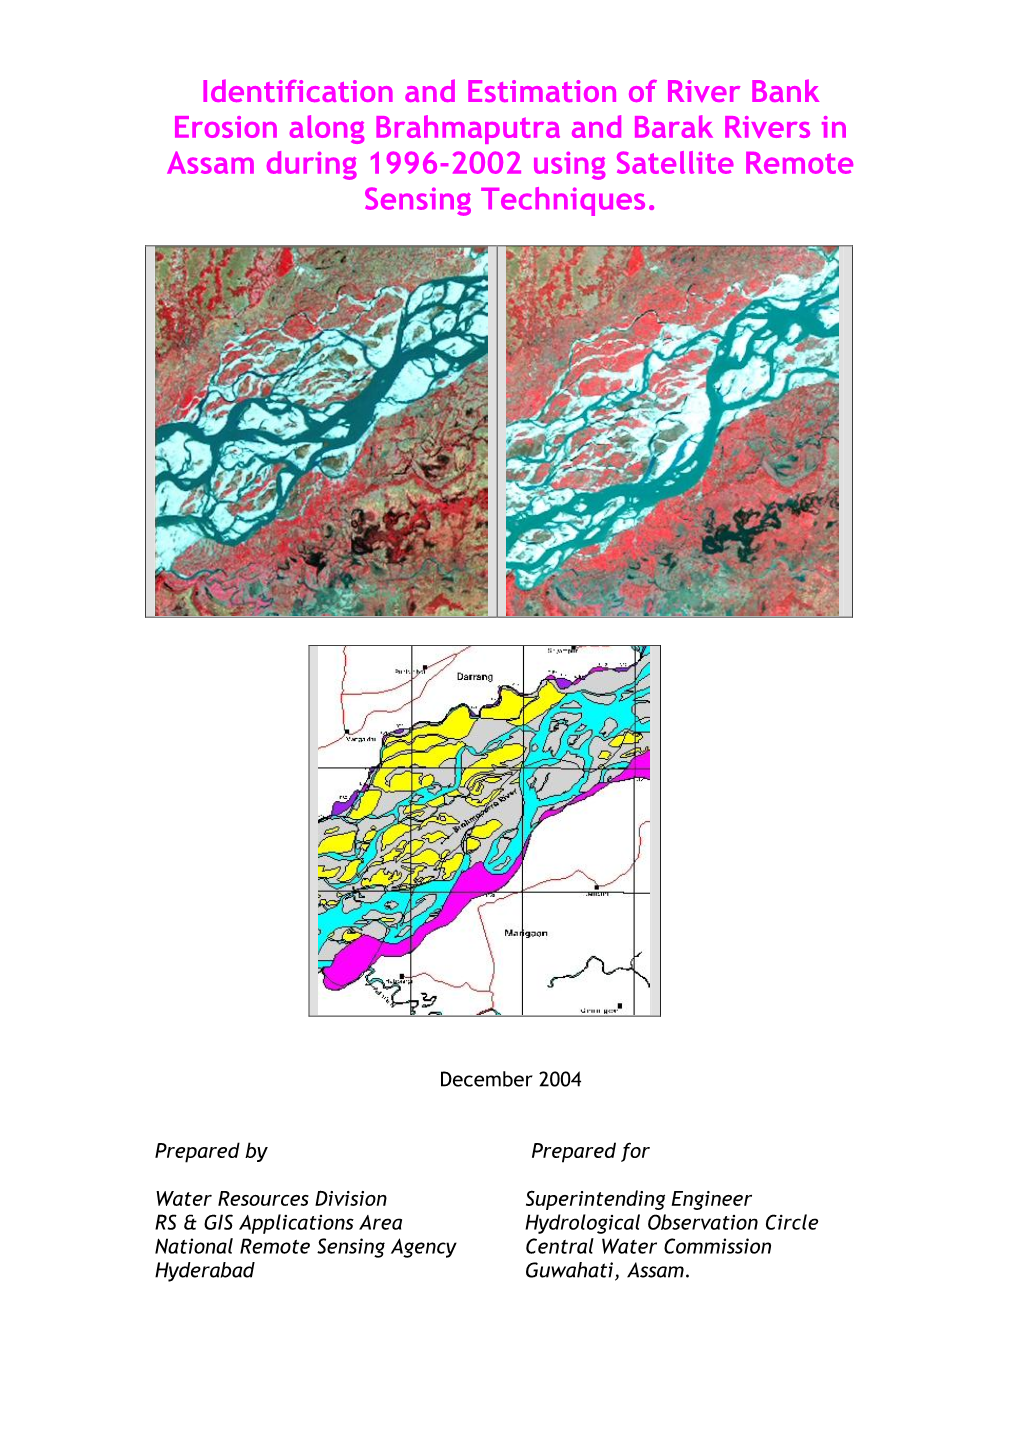 Identification and Estimation of River Bank Erosion Along Brahmaputra and Barak Rivers in Assam During 1996-2002 Using Satellite Remote Sensing Techniques